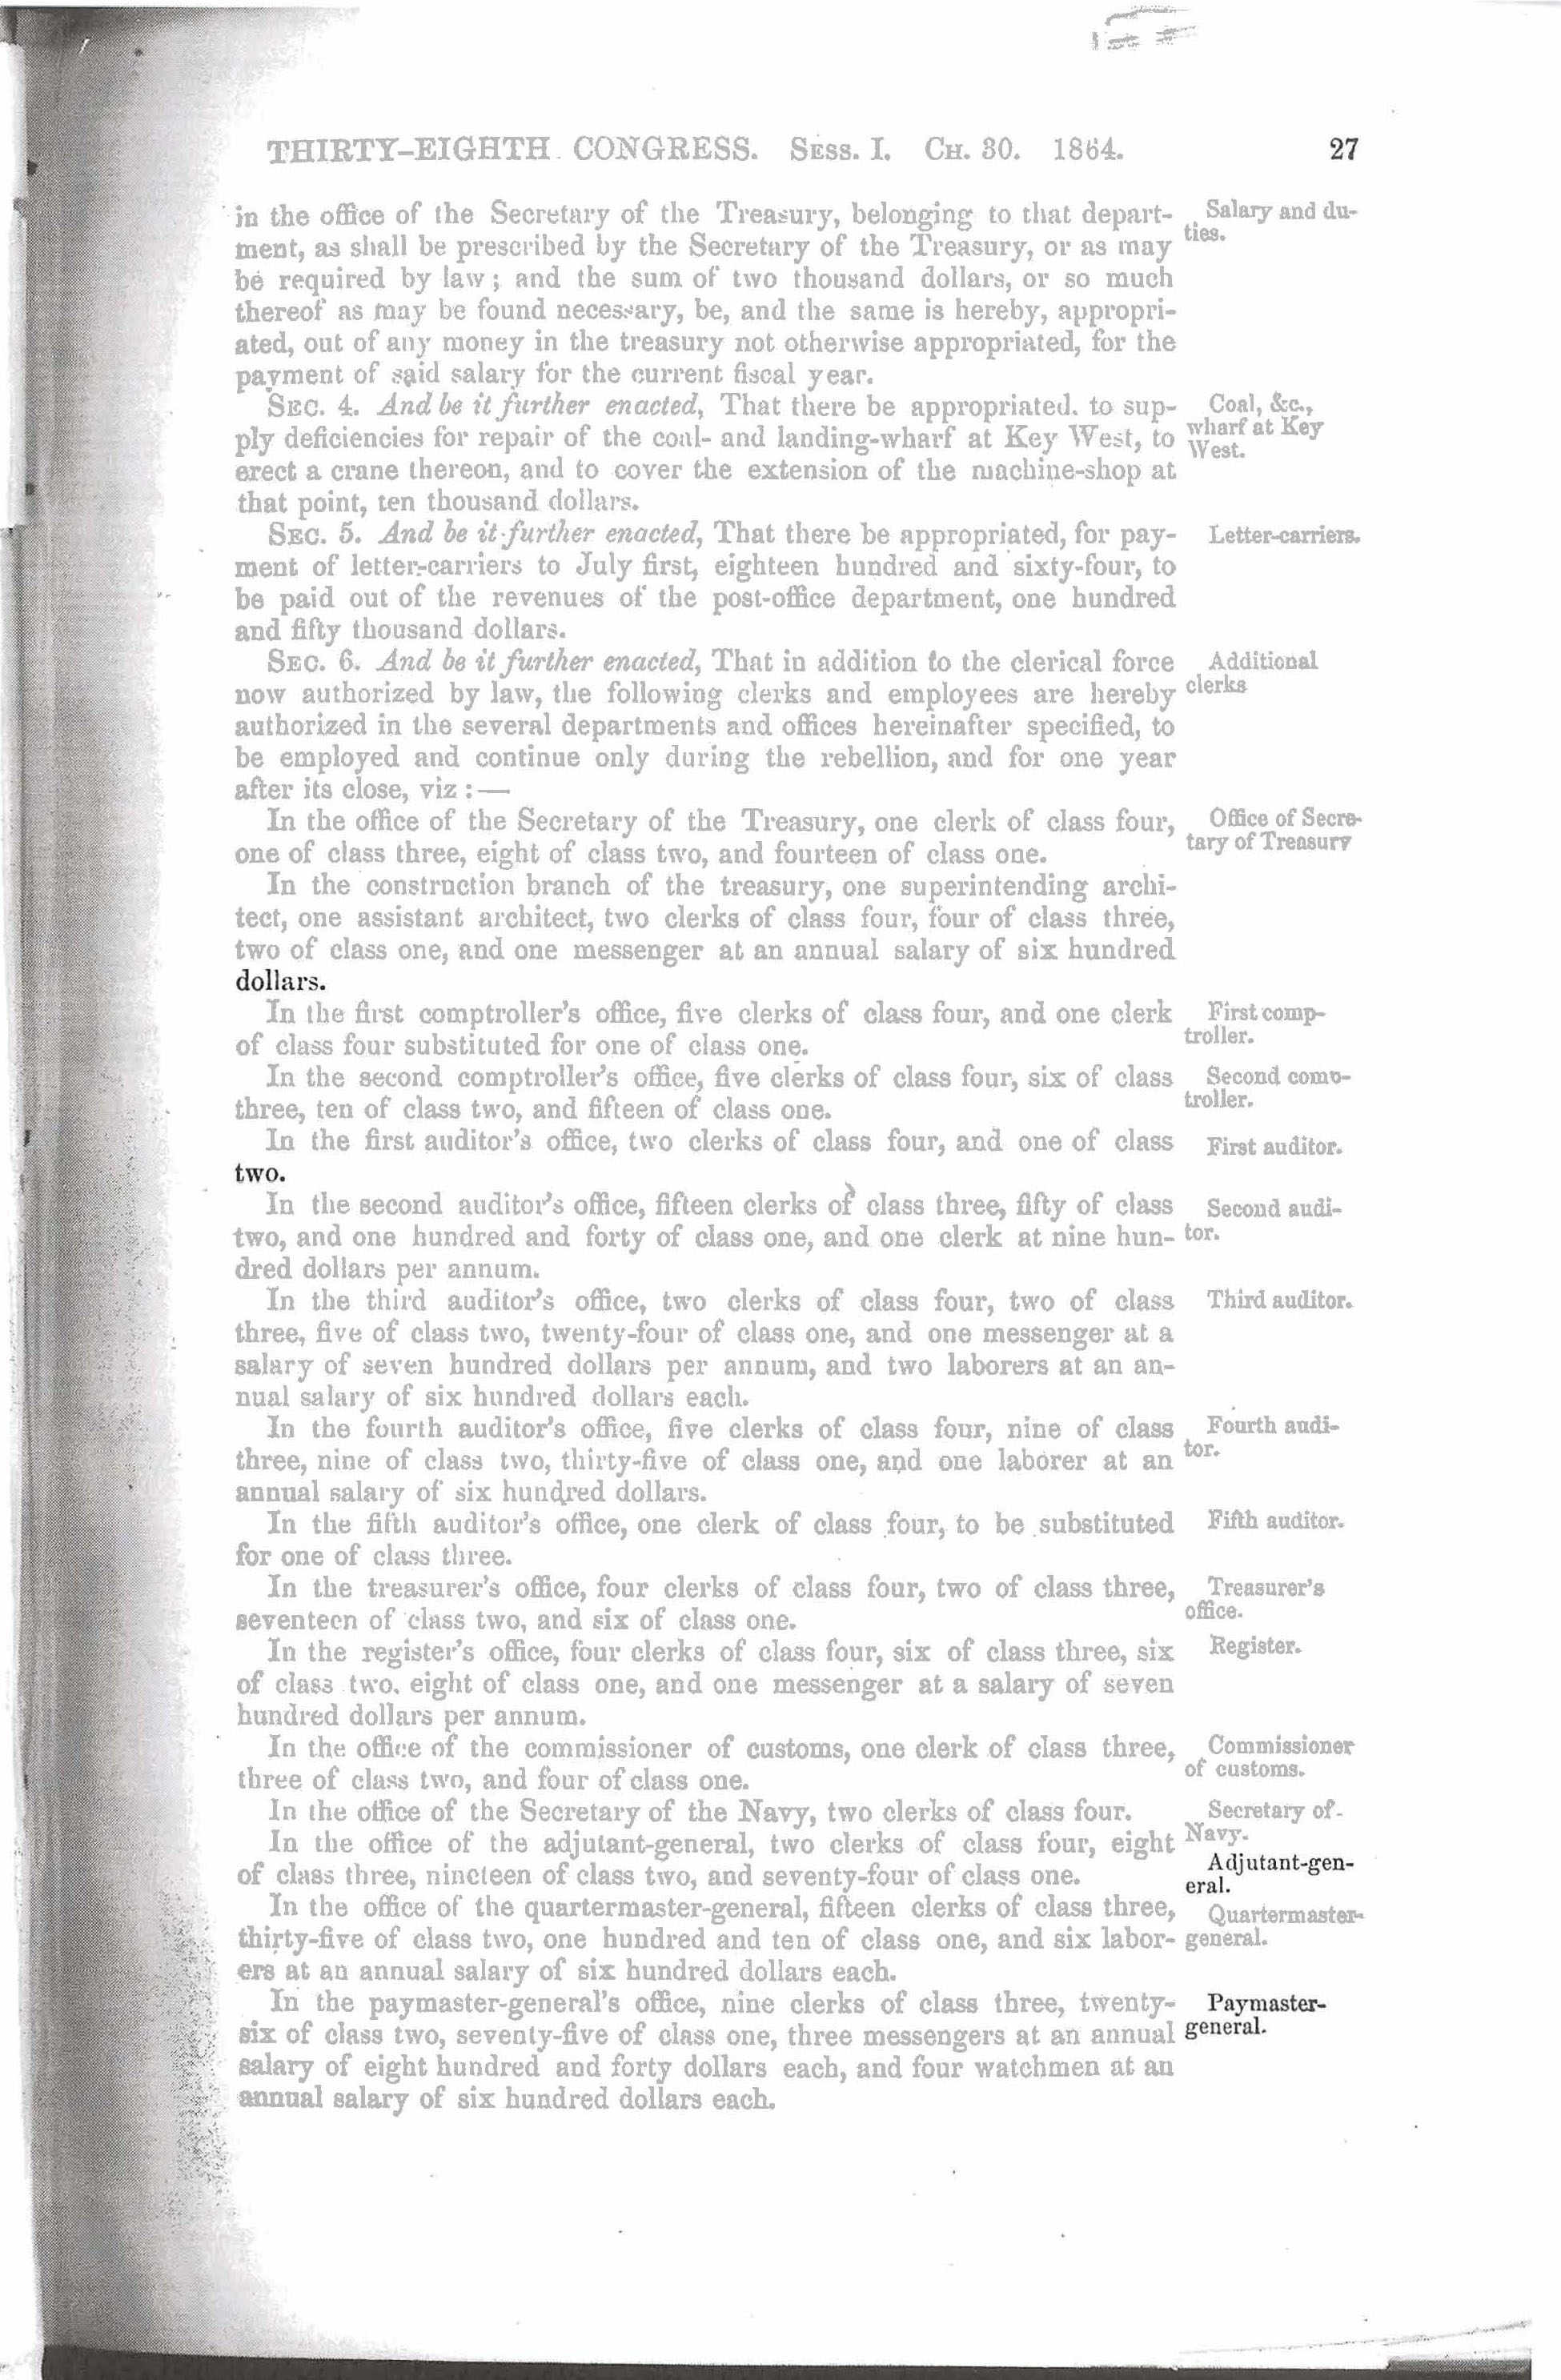 Act of Congress Authorizing Construction of the Washington Naval Hospital, Page 6 of 7